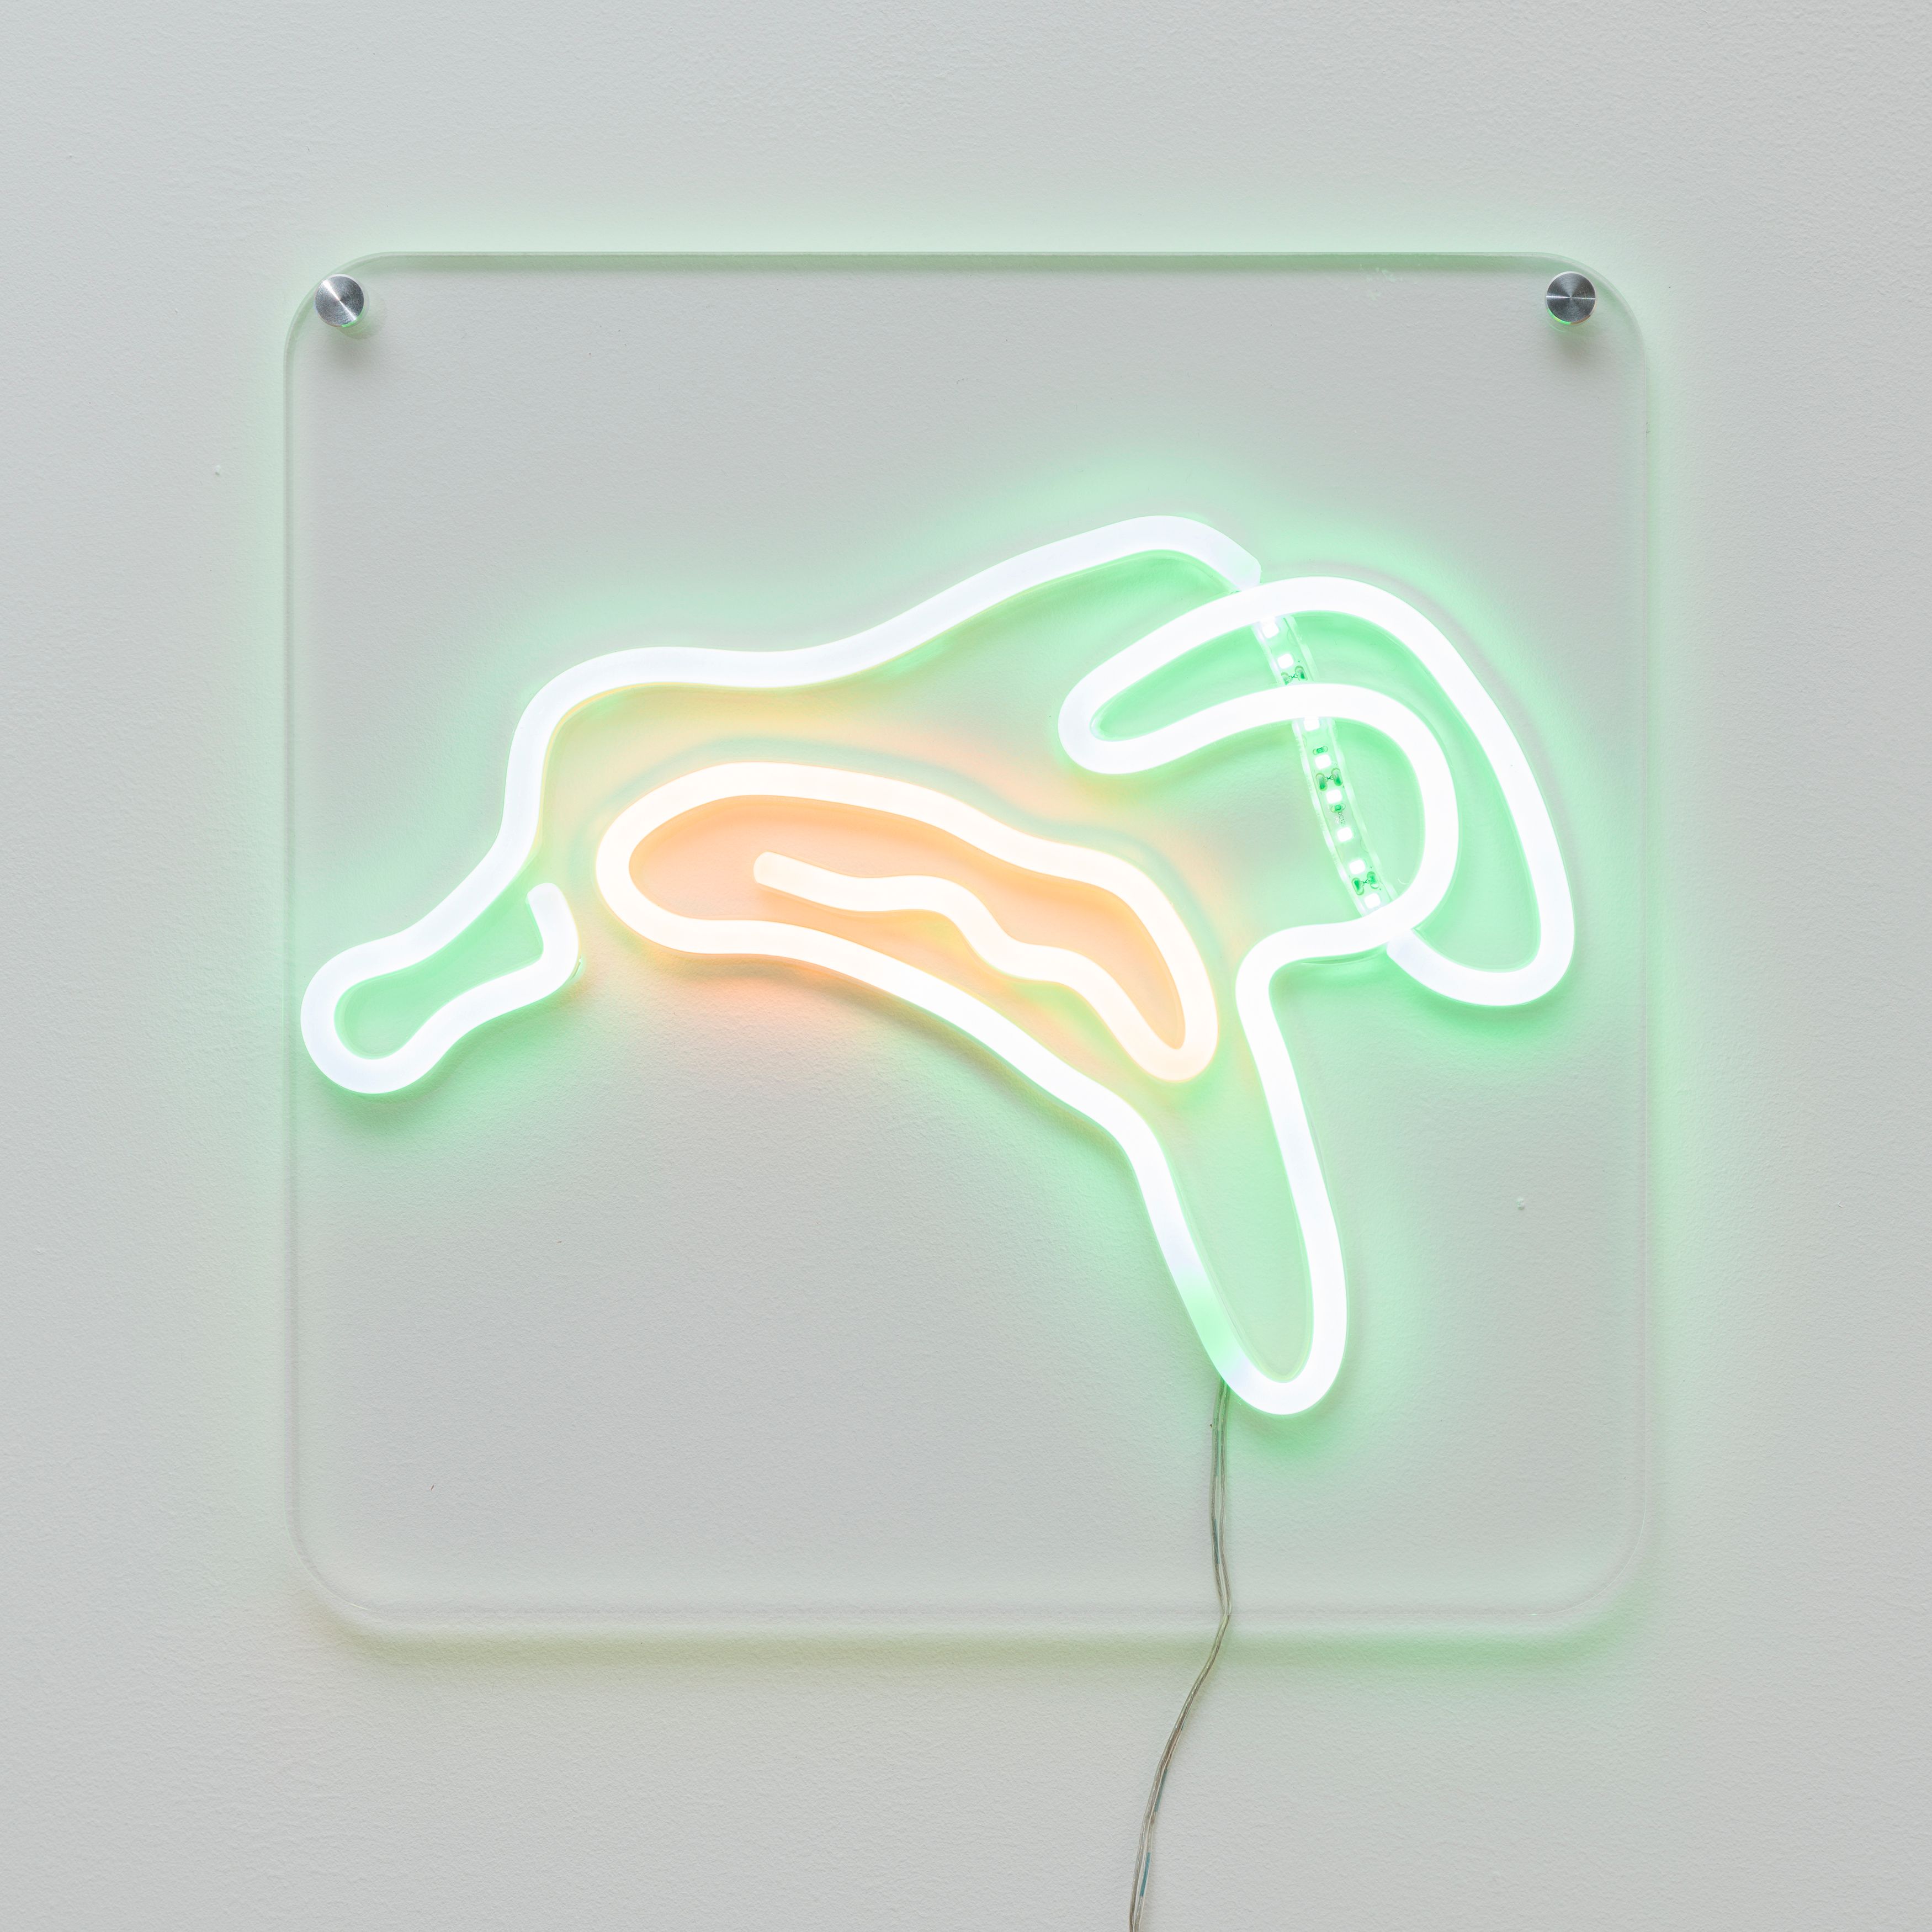 Choey Eun Young Cho, Bananananana (banana25), 2022, CNC engraved plexiglass, LED strip lights, connection wires, silicone tubes, 12 x 12 in. (30.48 x 30.48 cm)